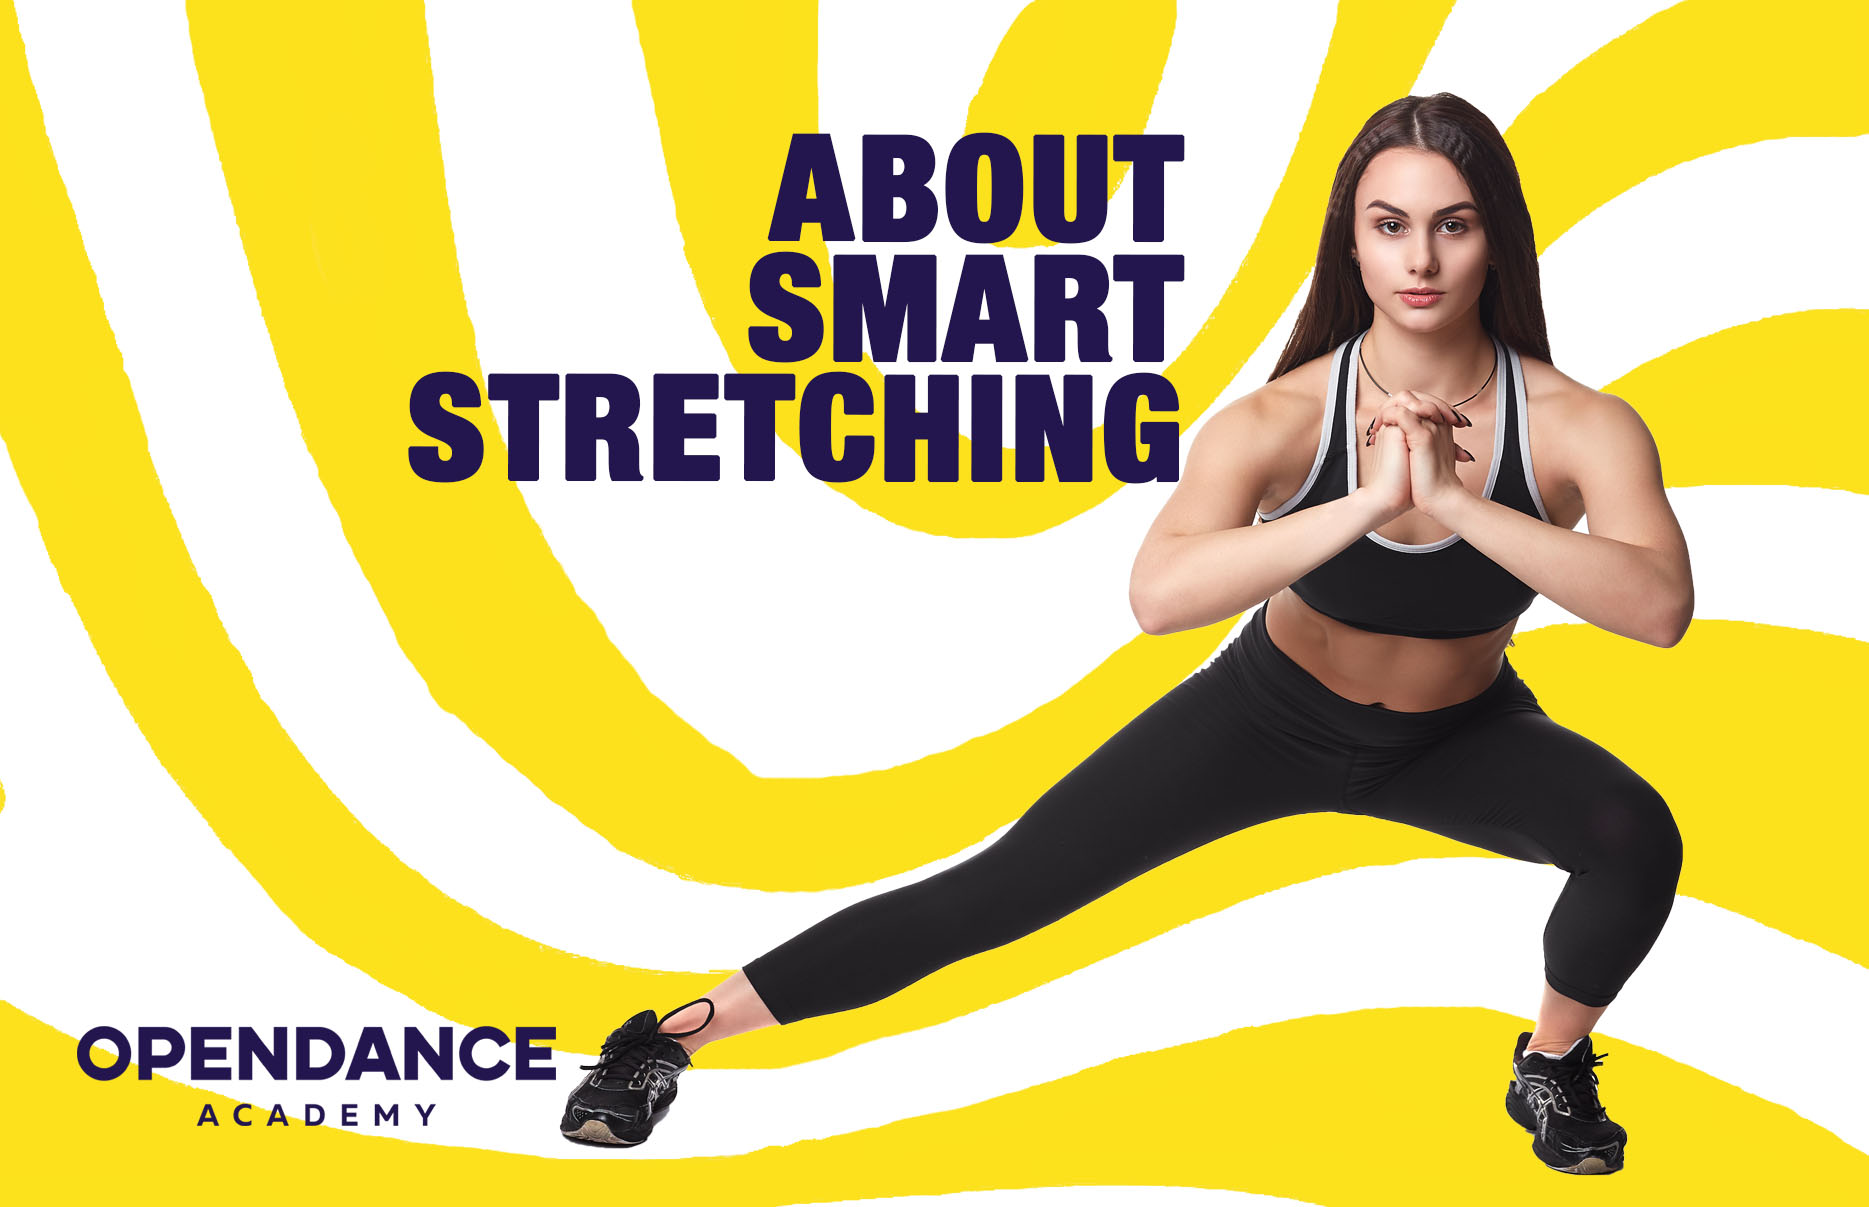 About Smart Stretching